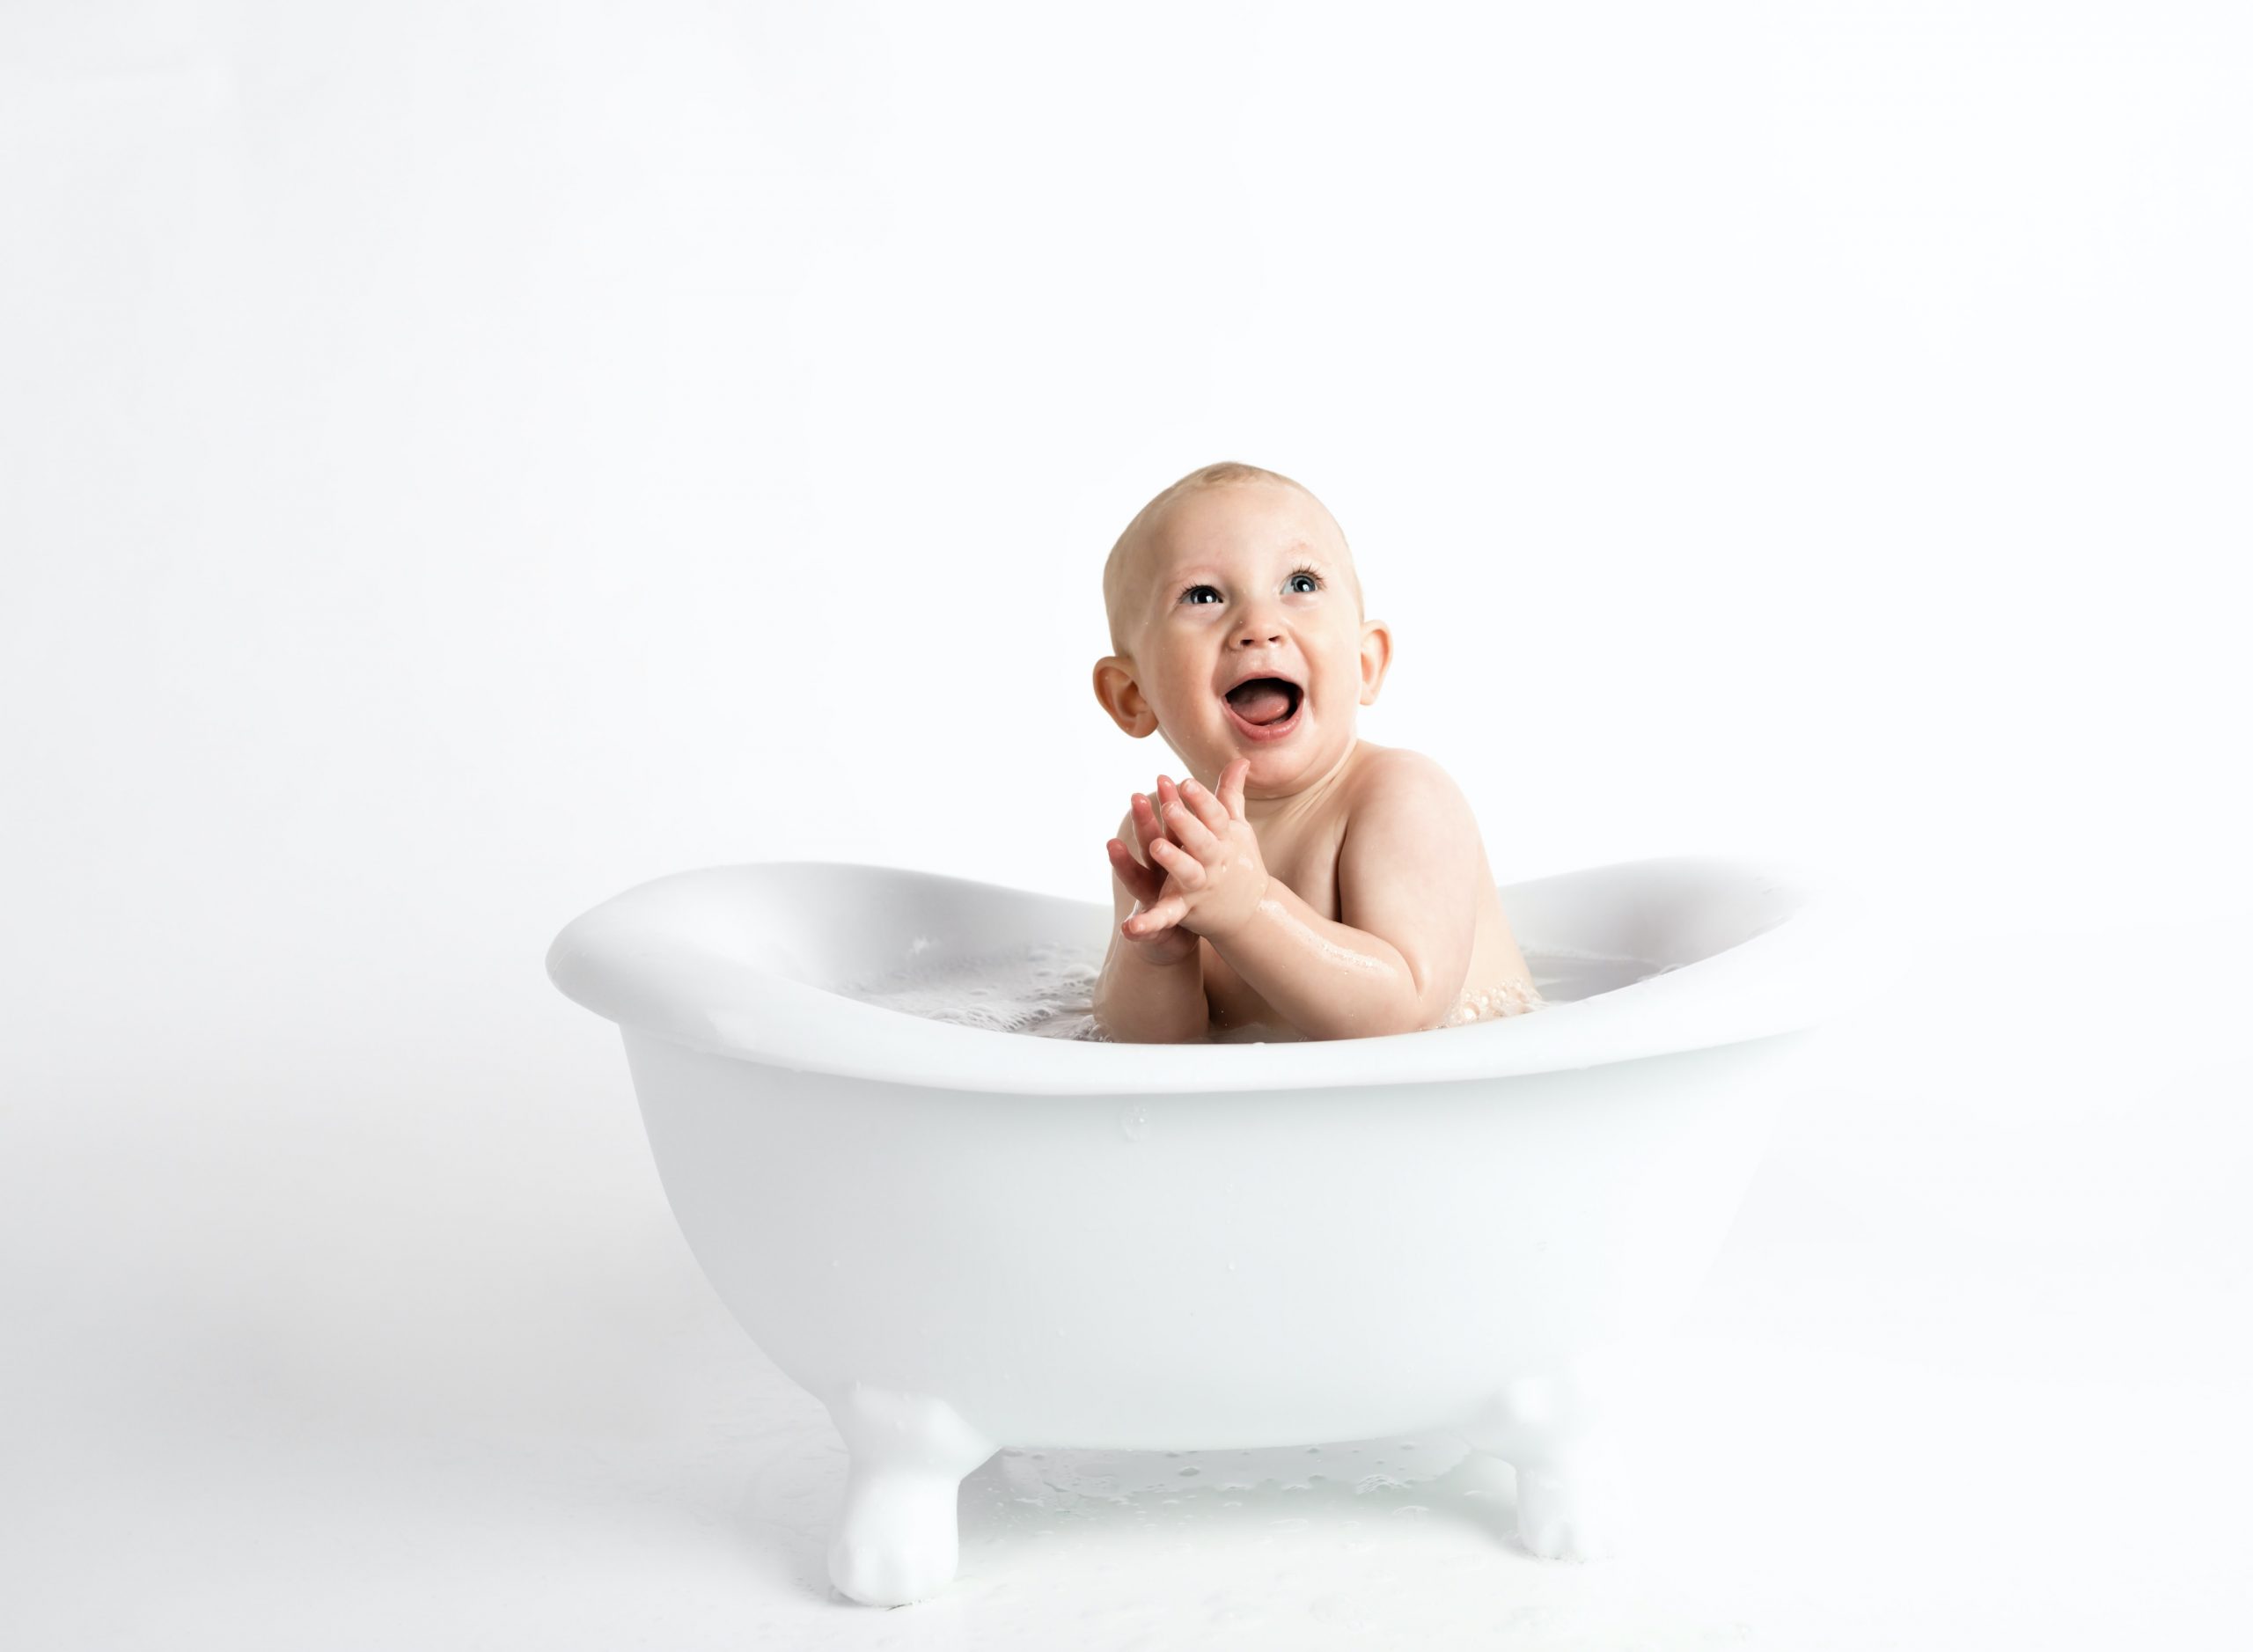 How To Take A Bath With A Newborn Baby